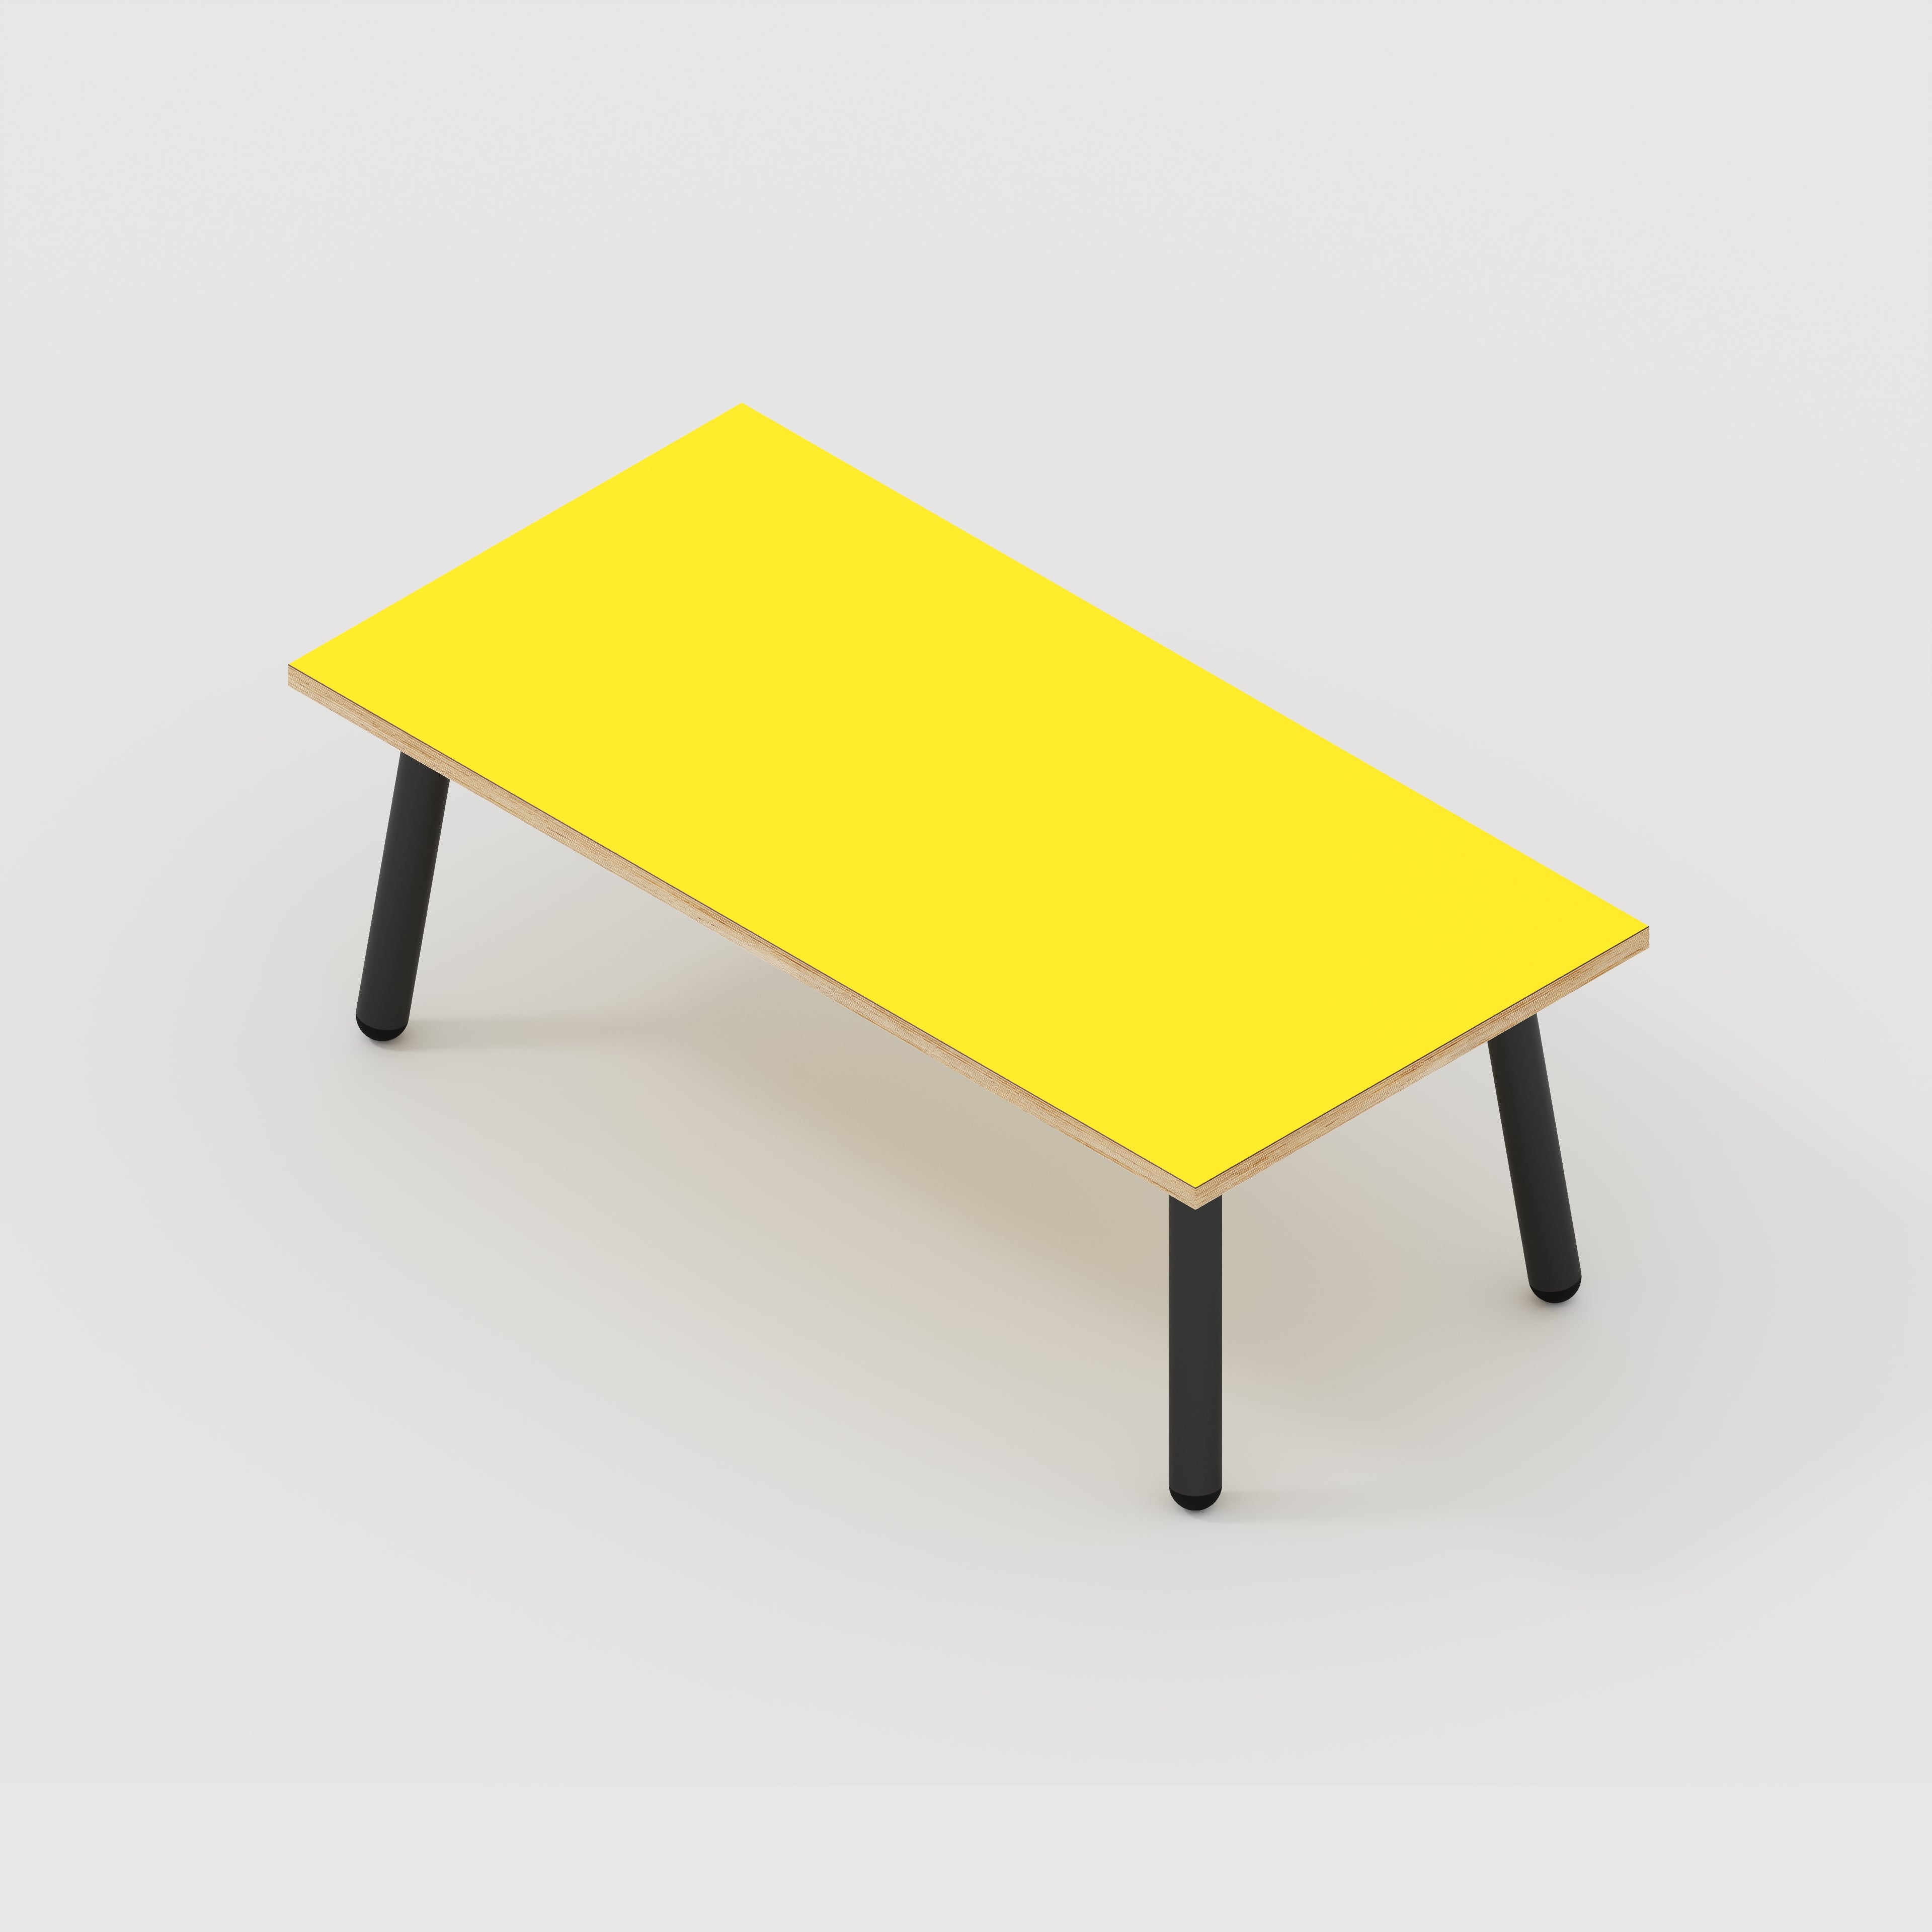 Coffee Table with Black Round Single Pin Legs - Formica Chrome Yellow - 1200(w) x 600(d) x 425(h)